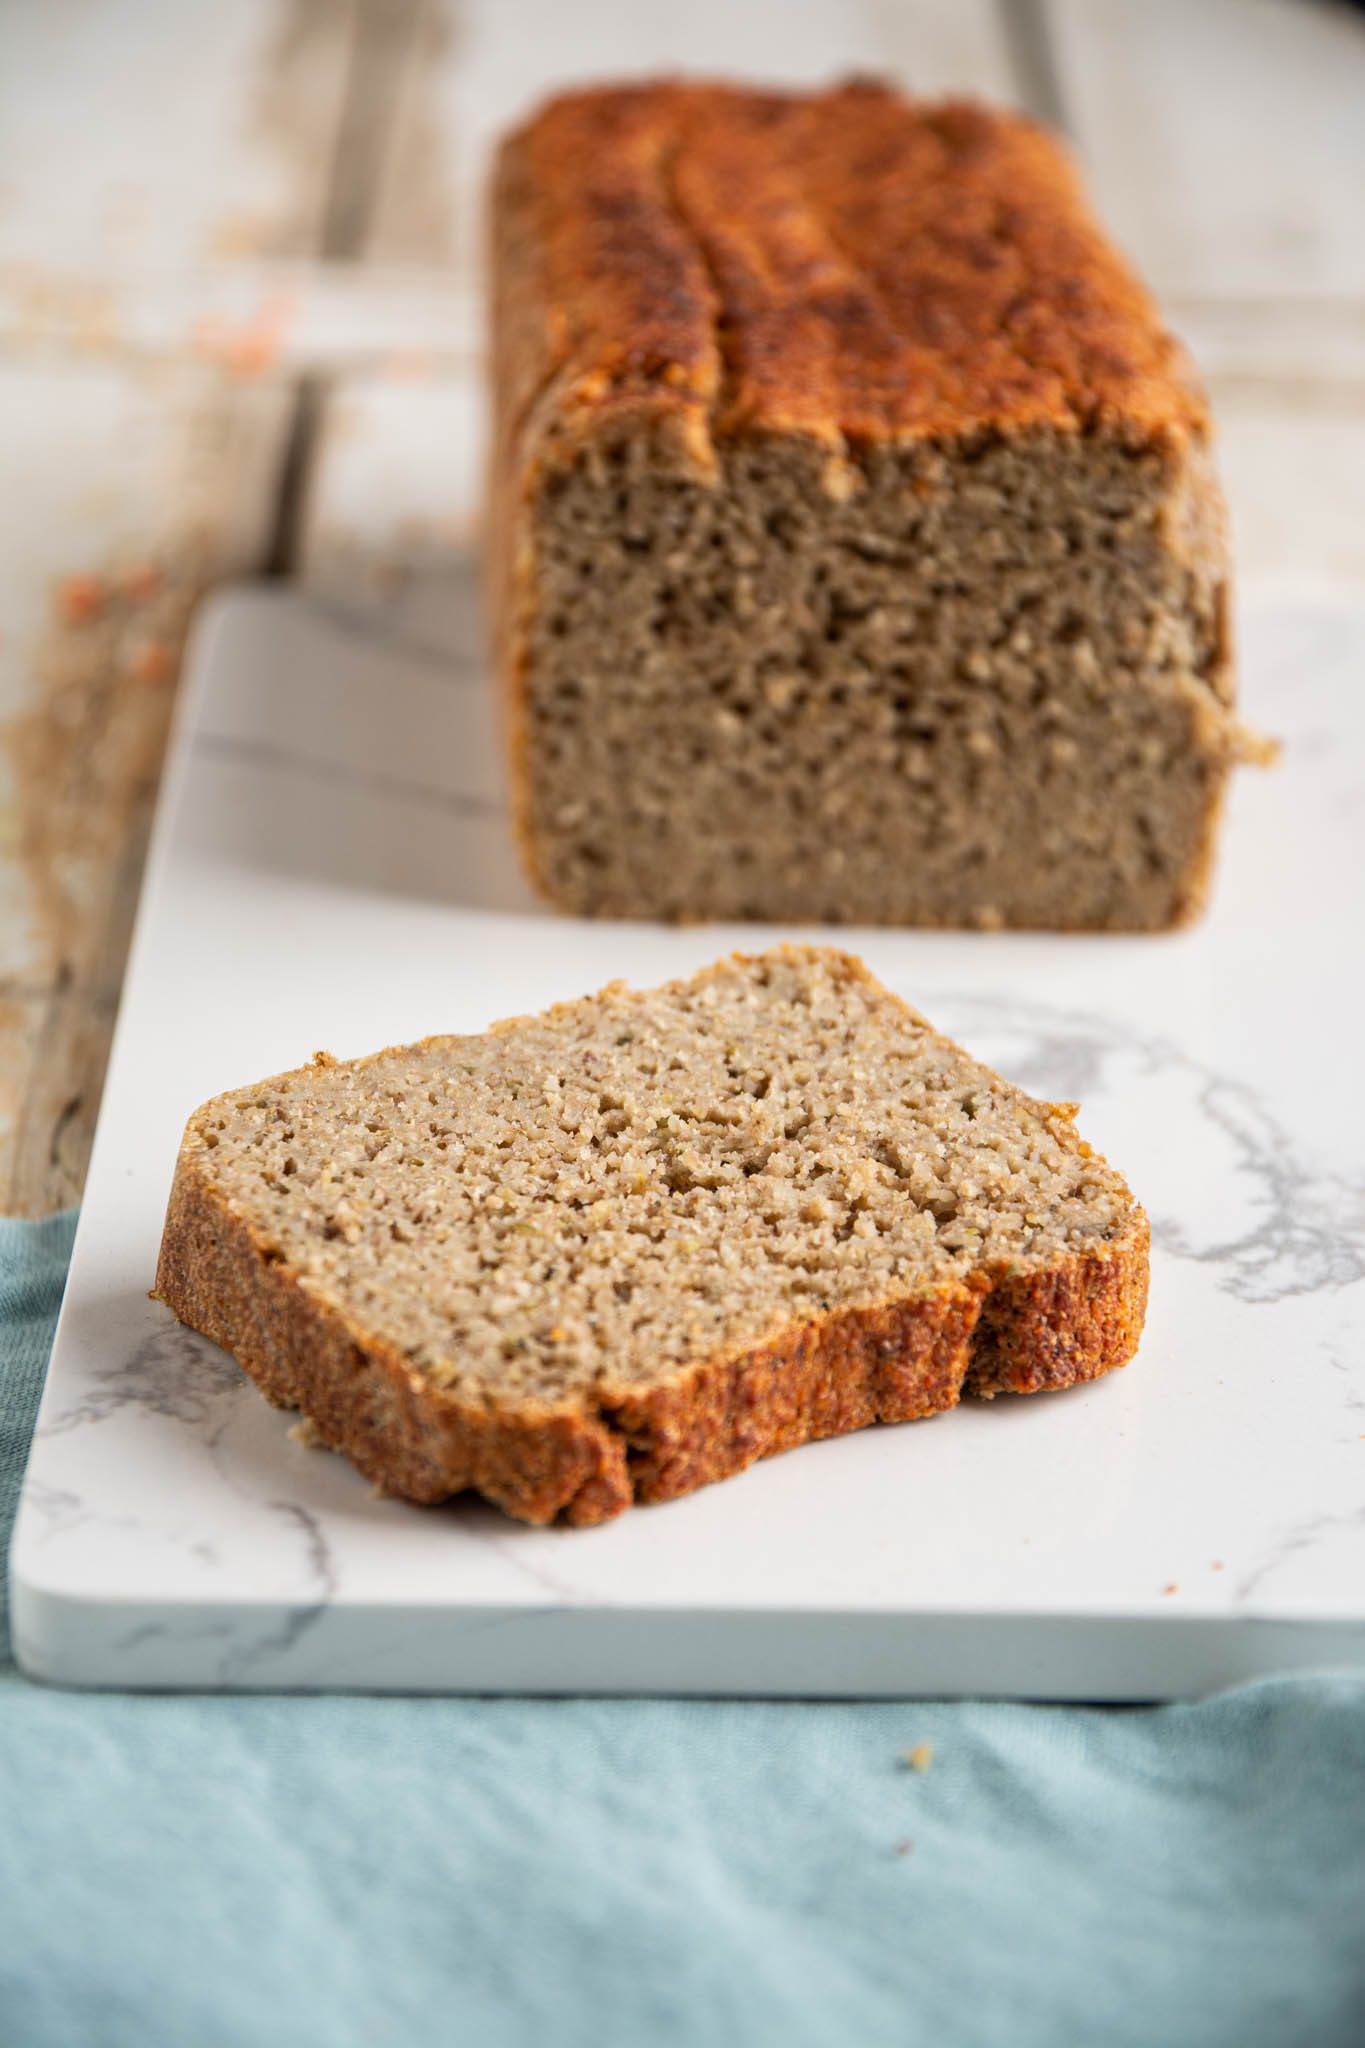 Learn how to make gluten-free sprouted bread with buckwheat and red lentils. This bread is also a no flour and no yeast recipe. Furthermore, you won't need any starter either.